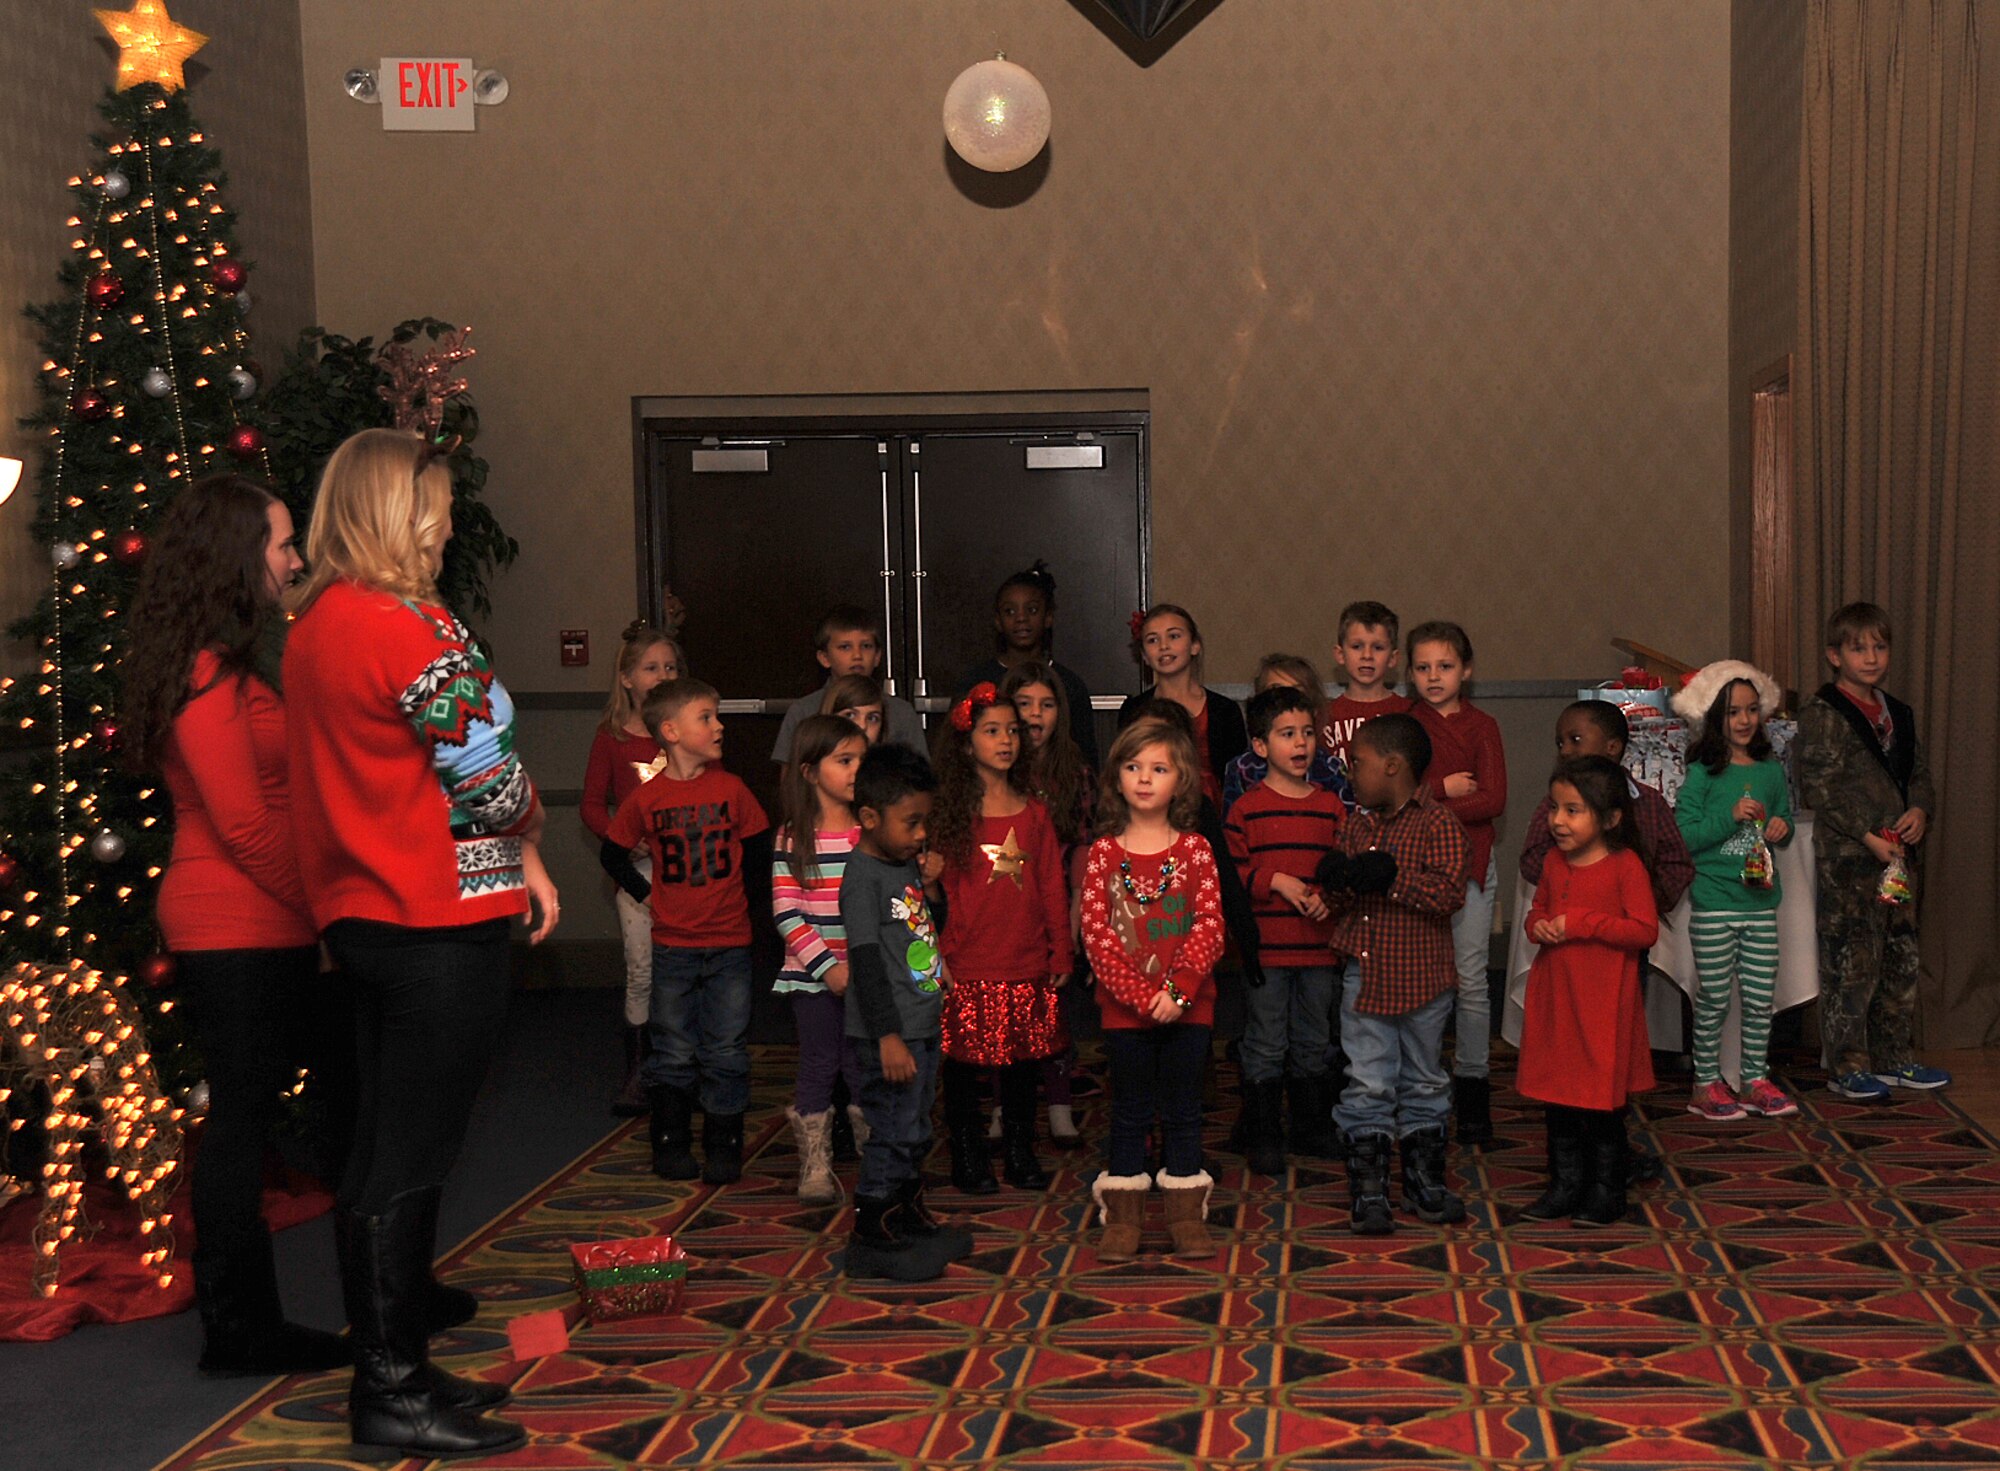 Children sing carols at the Holiday Tree Lighting ceremony in the Northern Lights Club on Grand Forks Air Force Base, North Dakota, Dec. 7, 2015. Additional activities at the event included a visit from Santa Claus, ornament making and free hot chocolate. (U.S. Air Force photo by Senior Airman Bonnie Grantham/released)